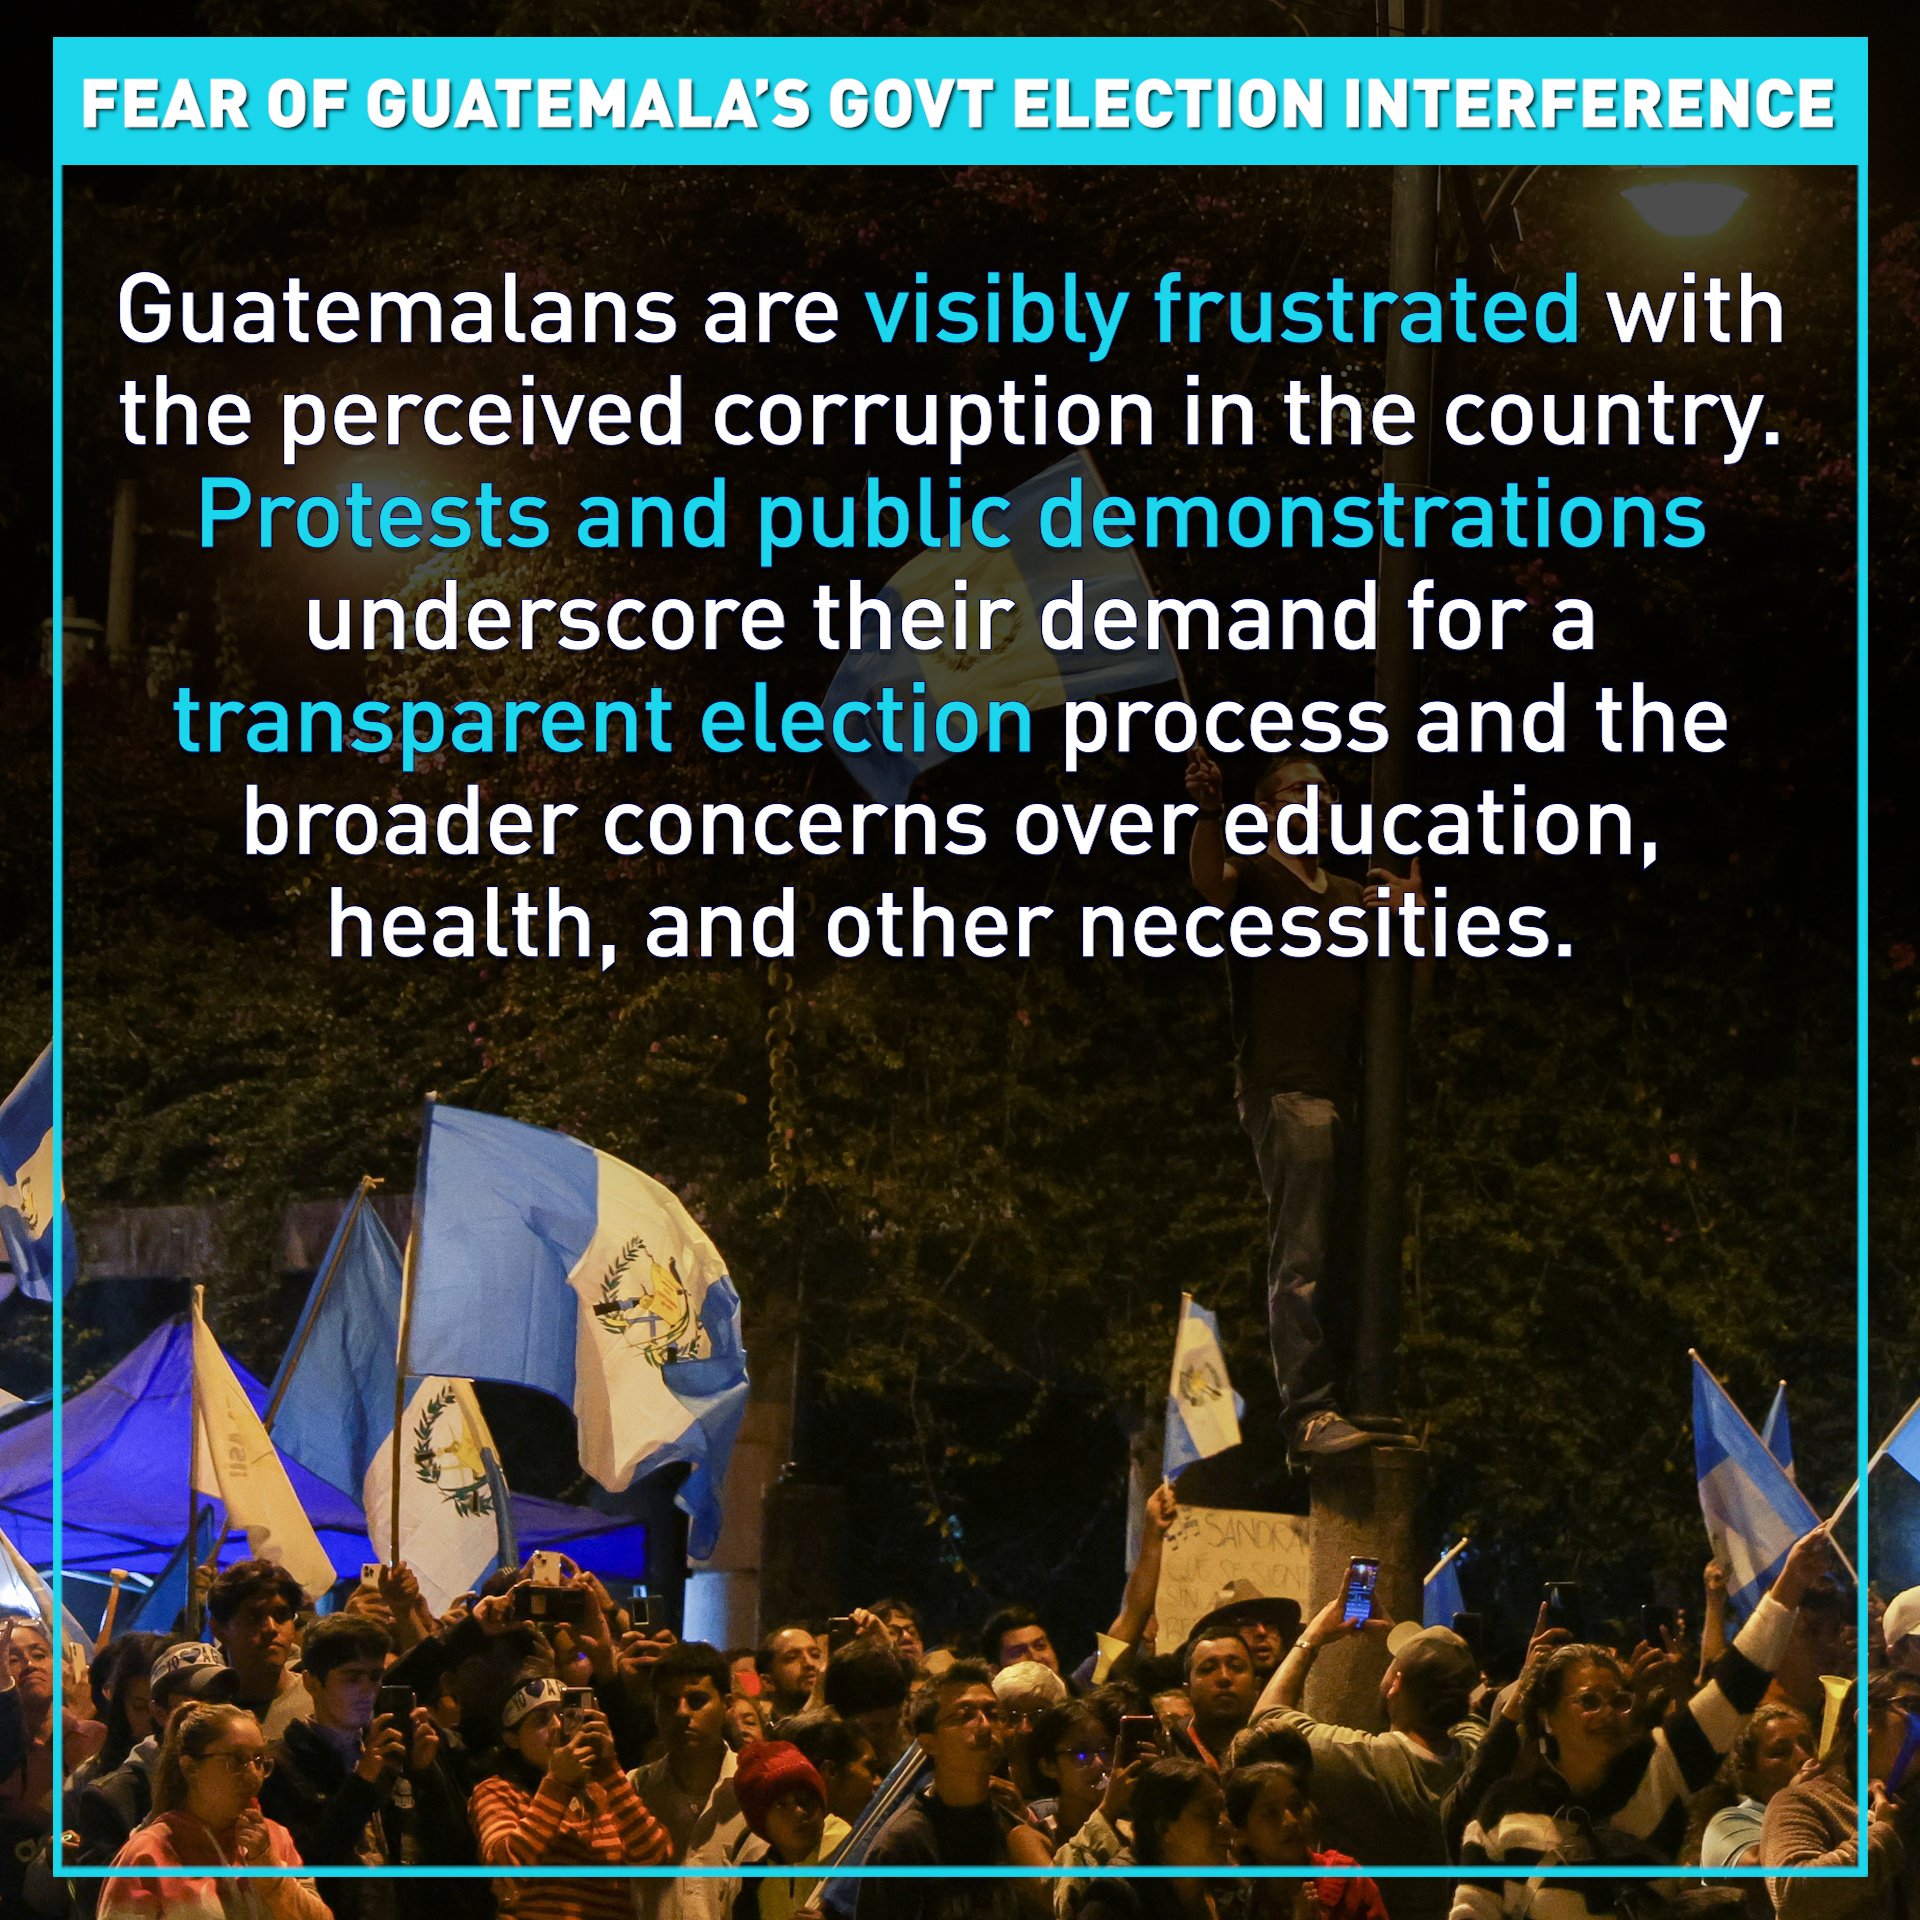 Guatemala chooses next leader, but many fear possible government election interference